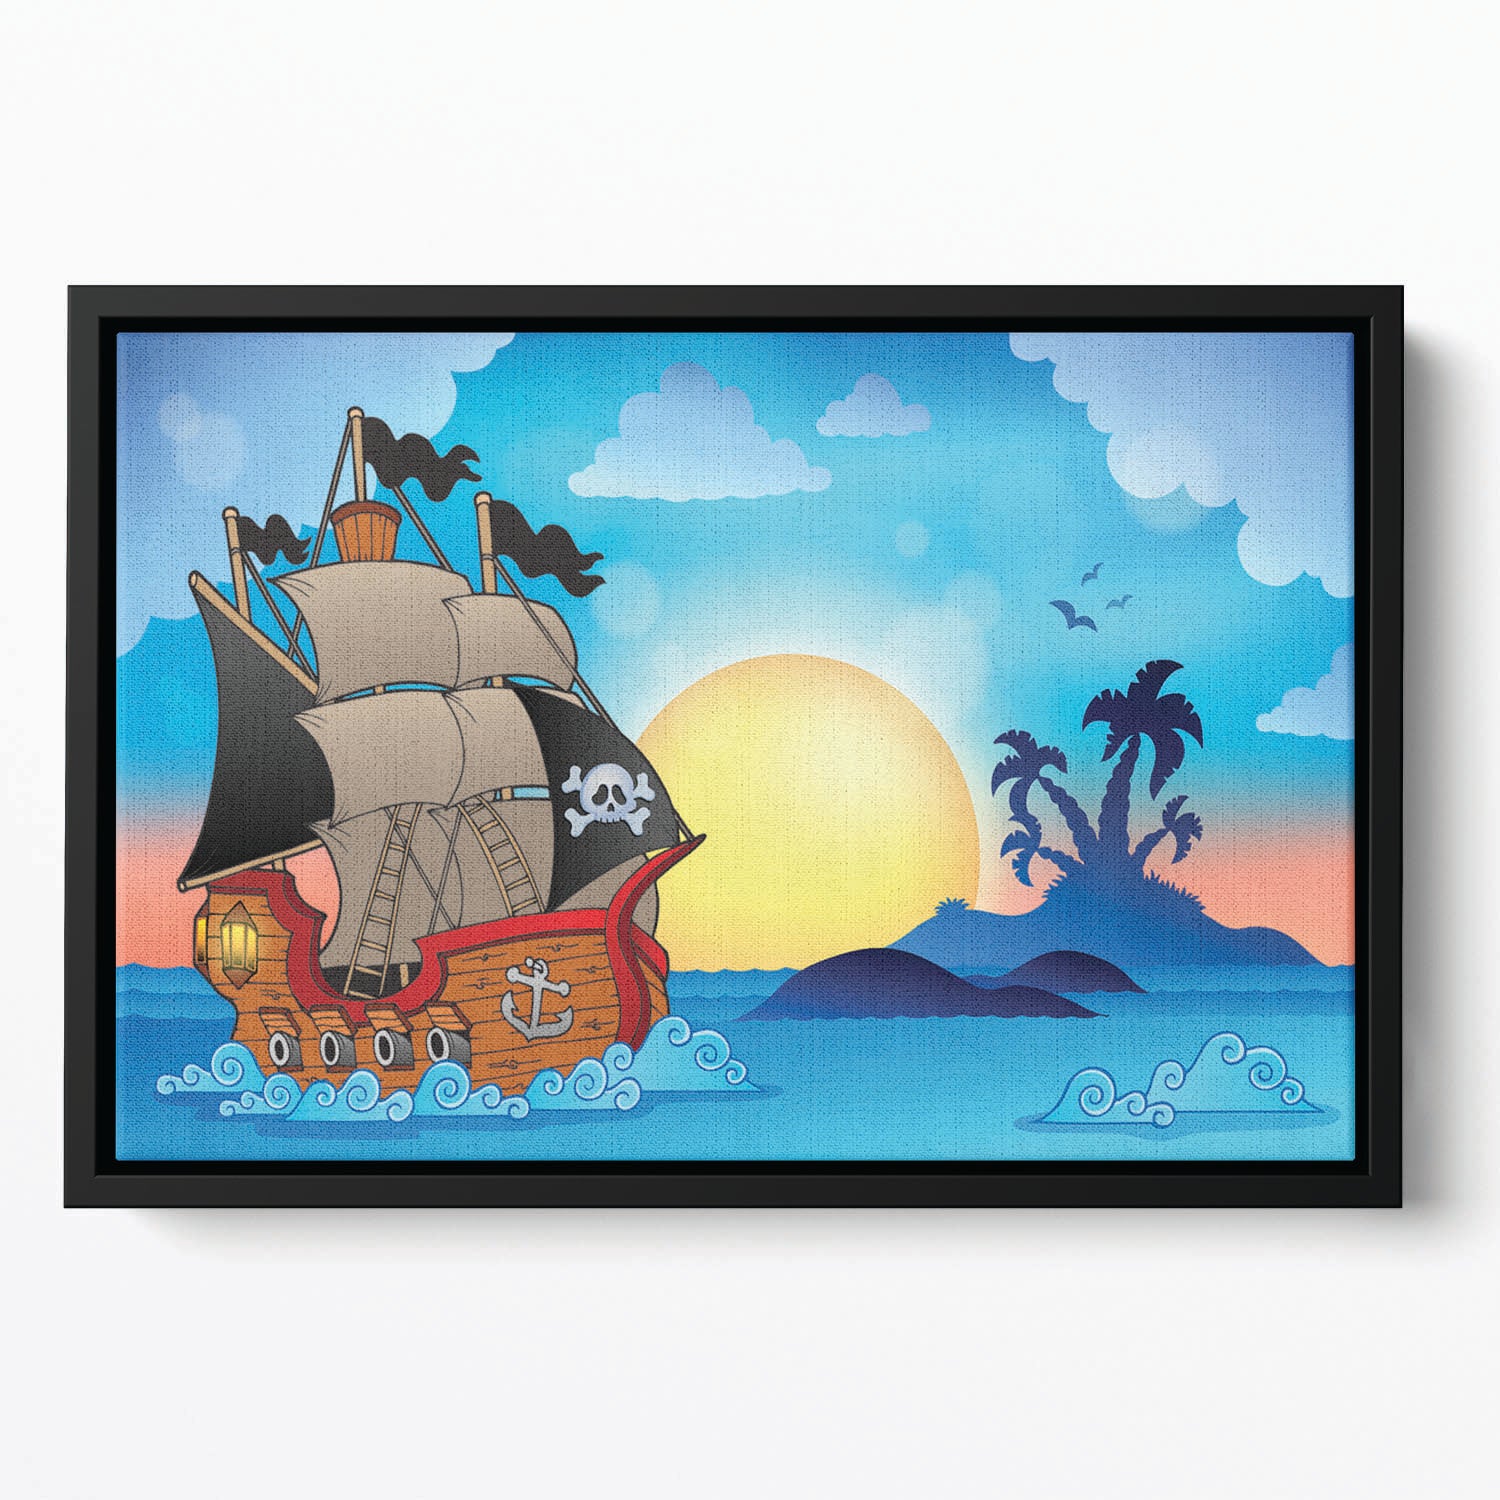 Pirate ship near small island Floating Framed Canvas